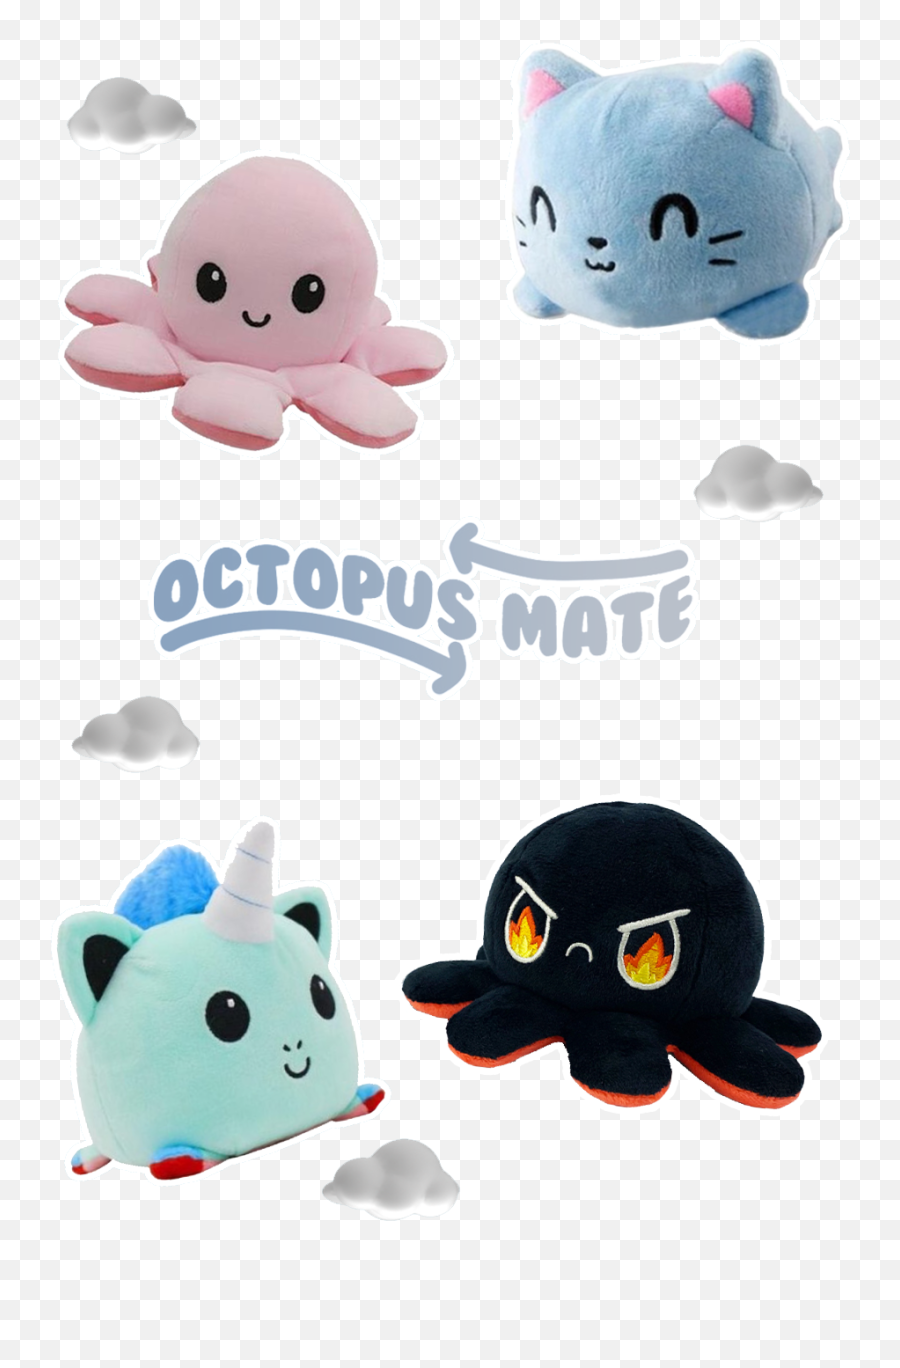 Octopus Mate Is The Home Of The Original Reversible Octopus - Soft Emoji,Emotions Plush